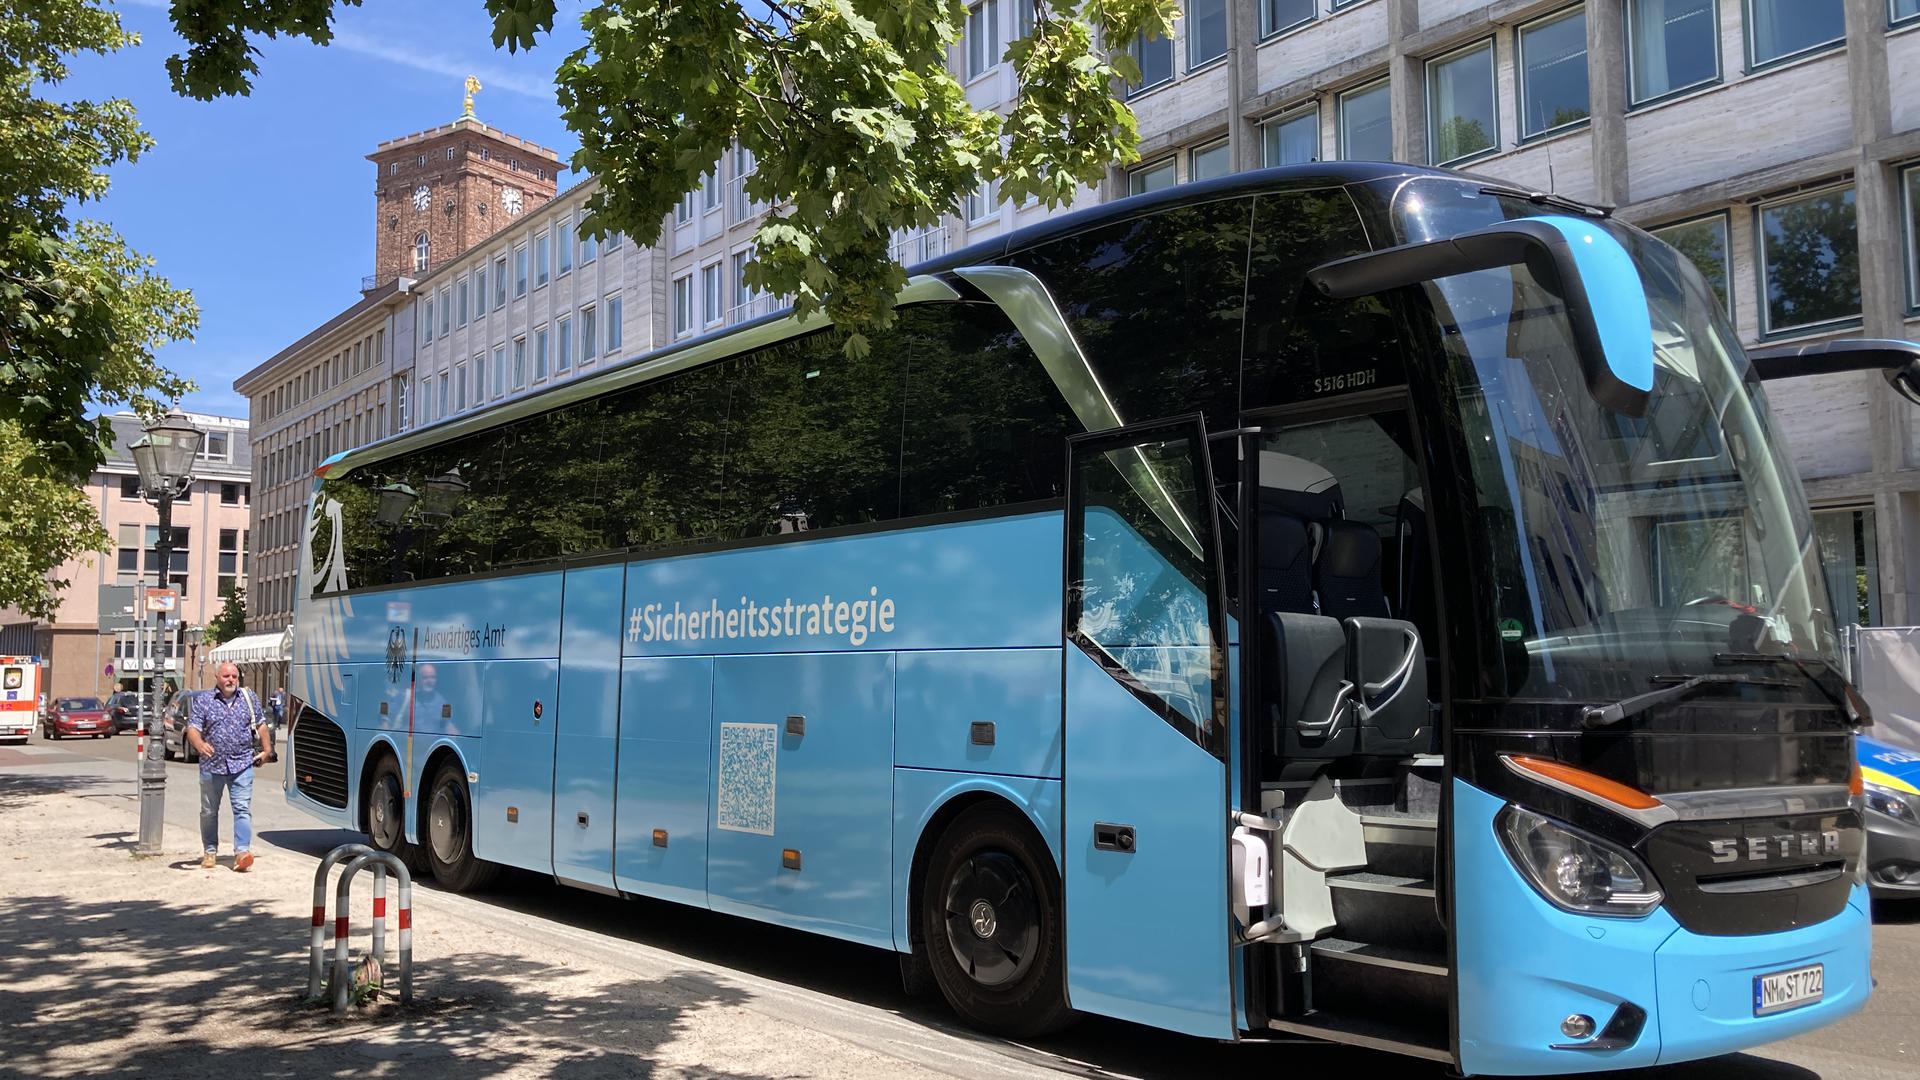 Blue as the color of a peaceful sky: Foreign Minister Annalena Baerbock is currently traveling across the republic in this tour bus - photographed in Karlsruhe on Sunday - to talk to people about Germany's future national security strategy.